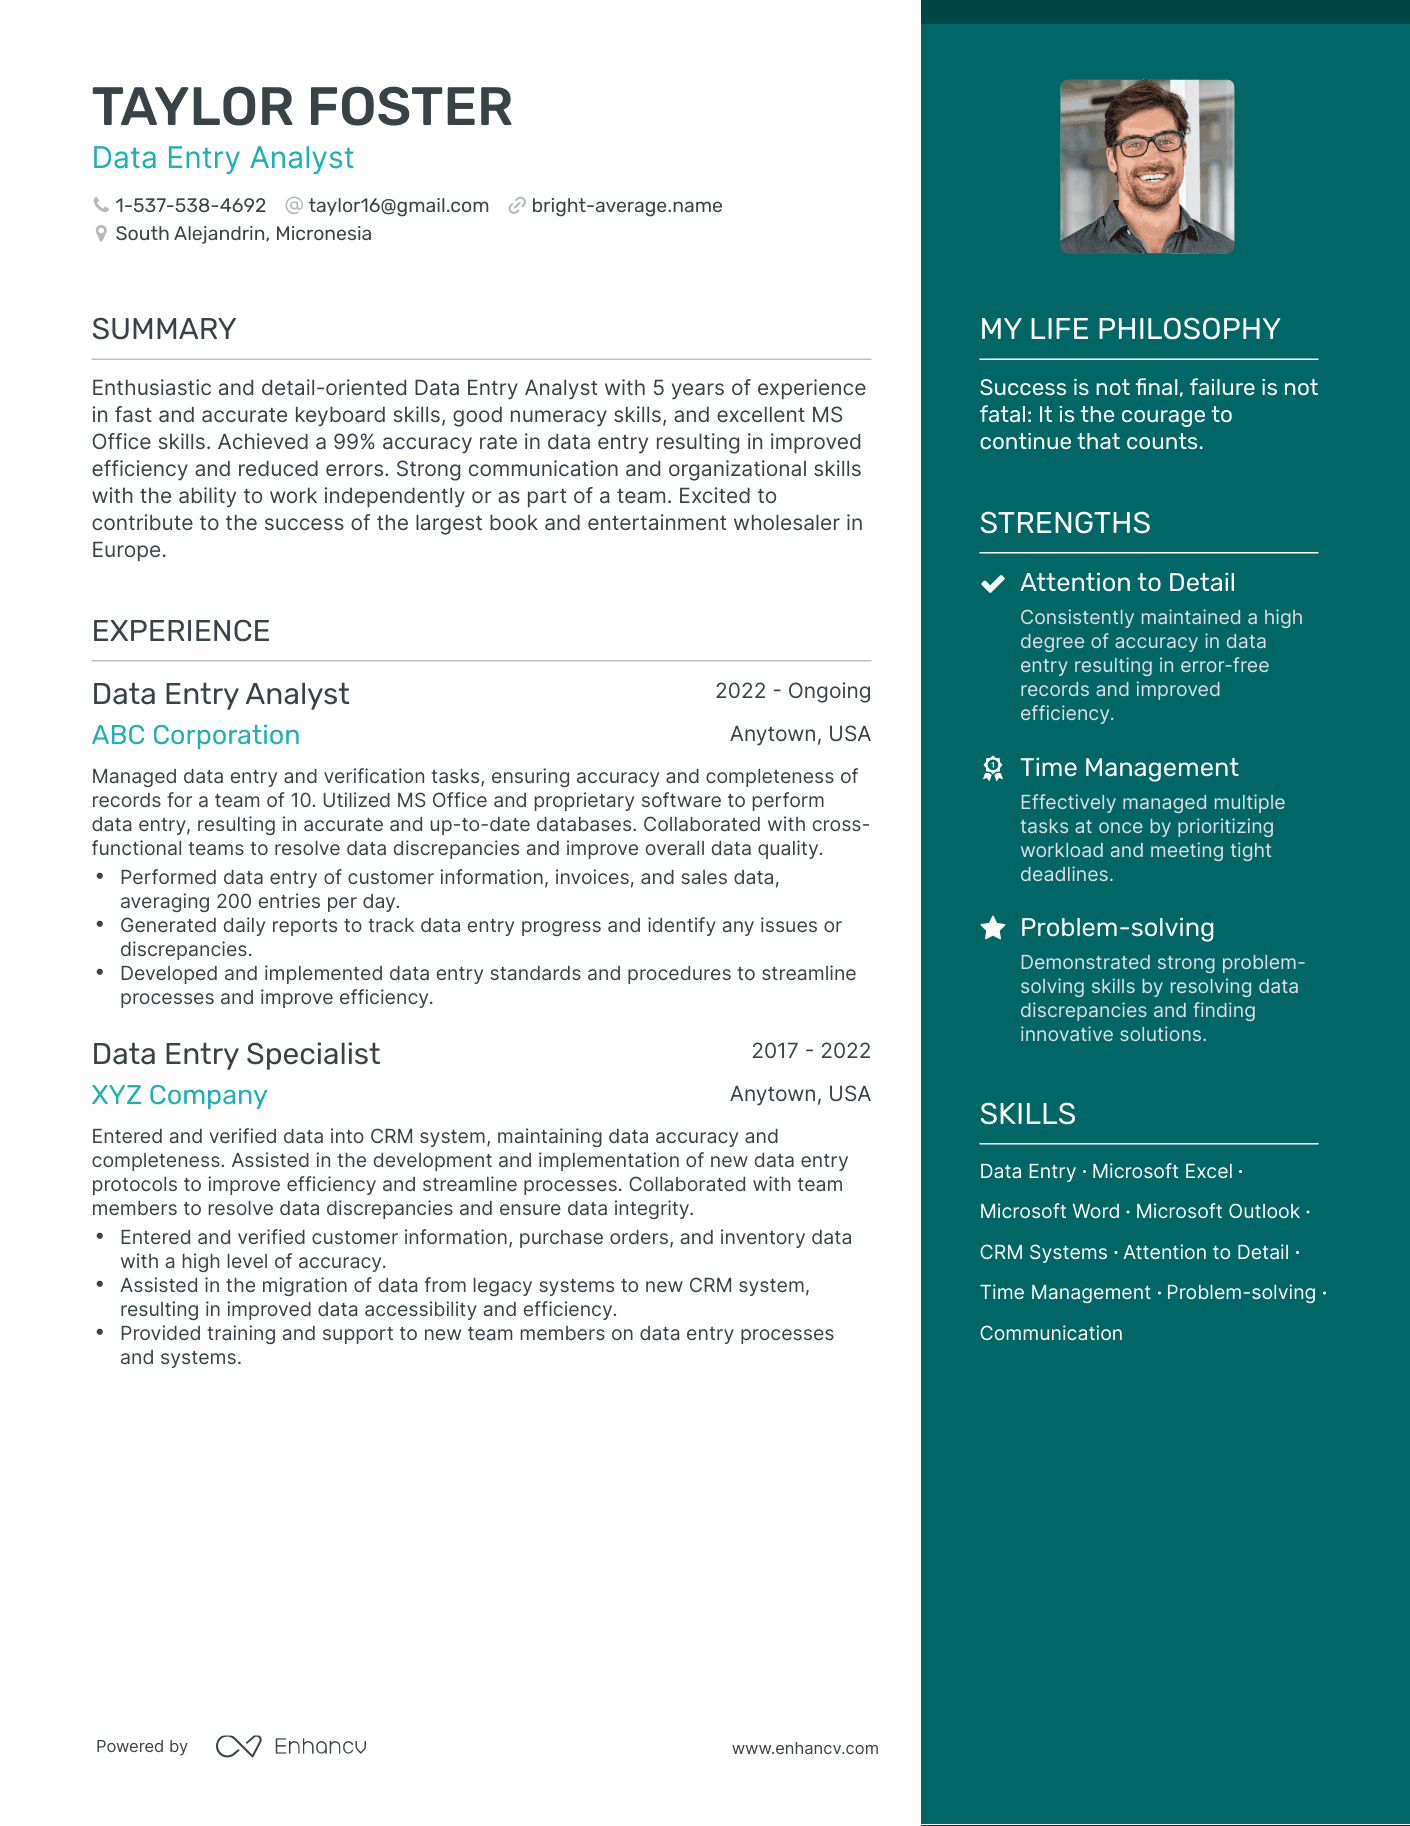 Data Entry Analyst resume example